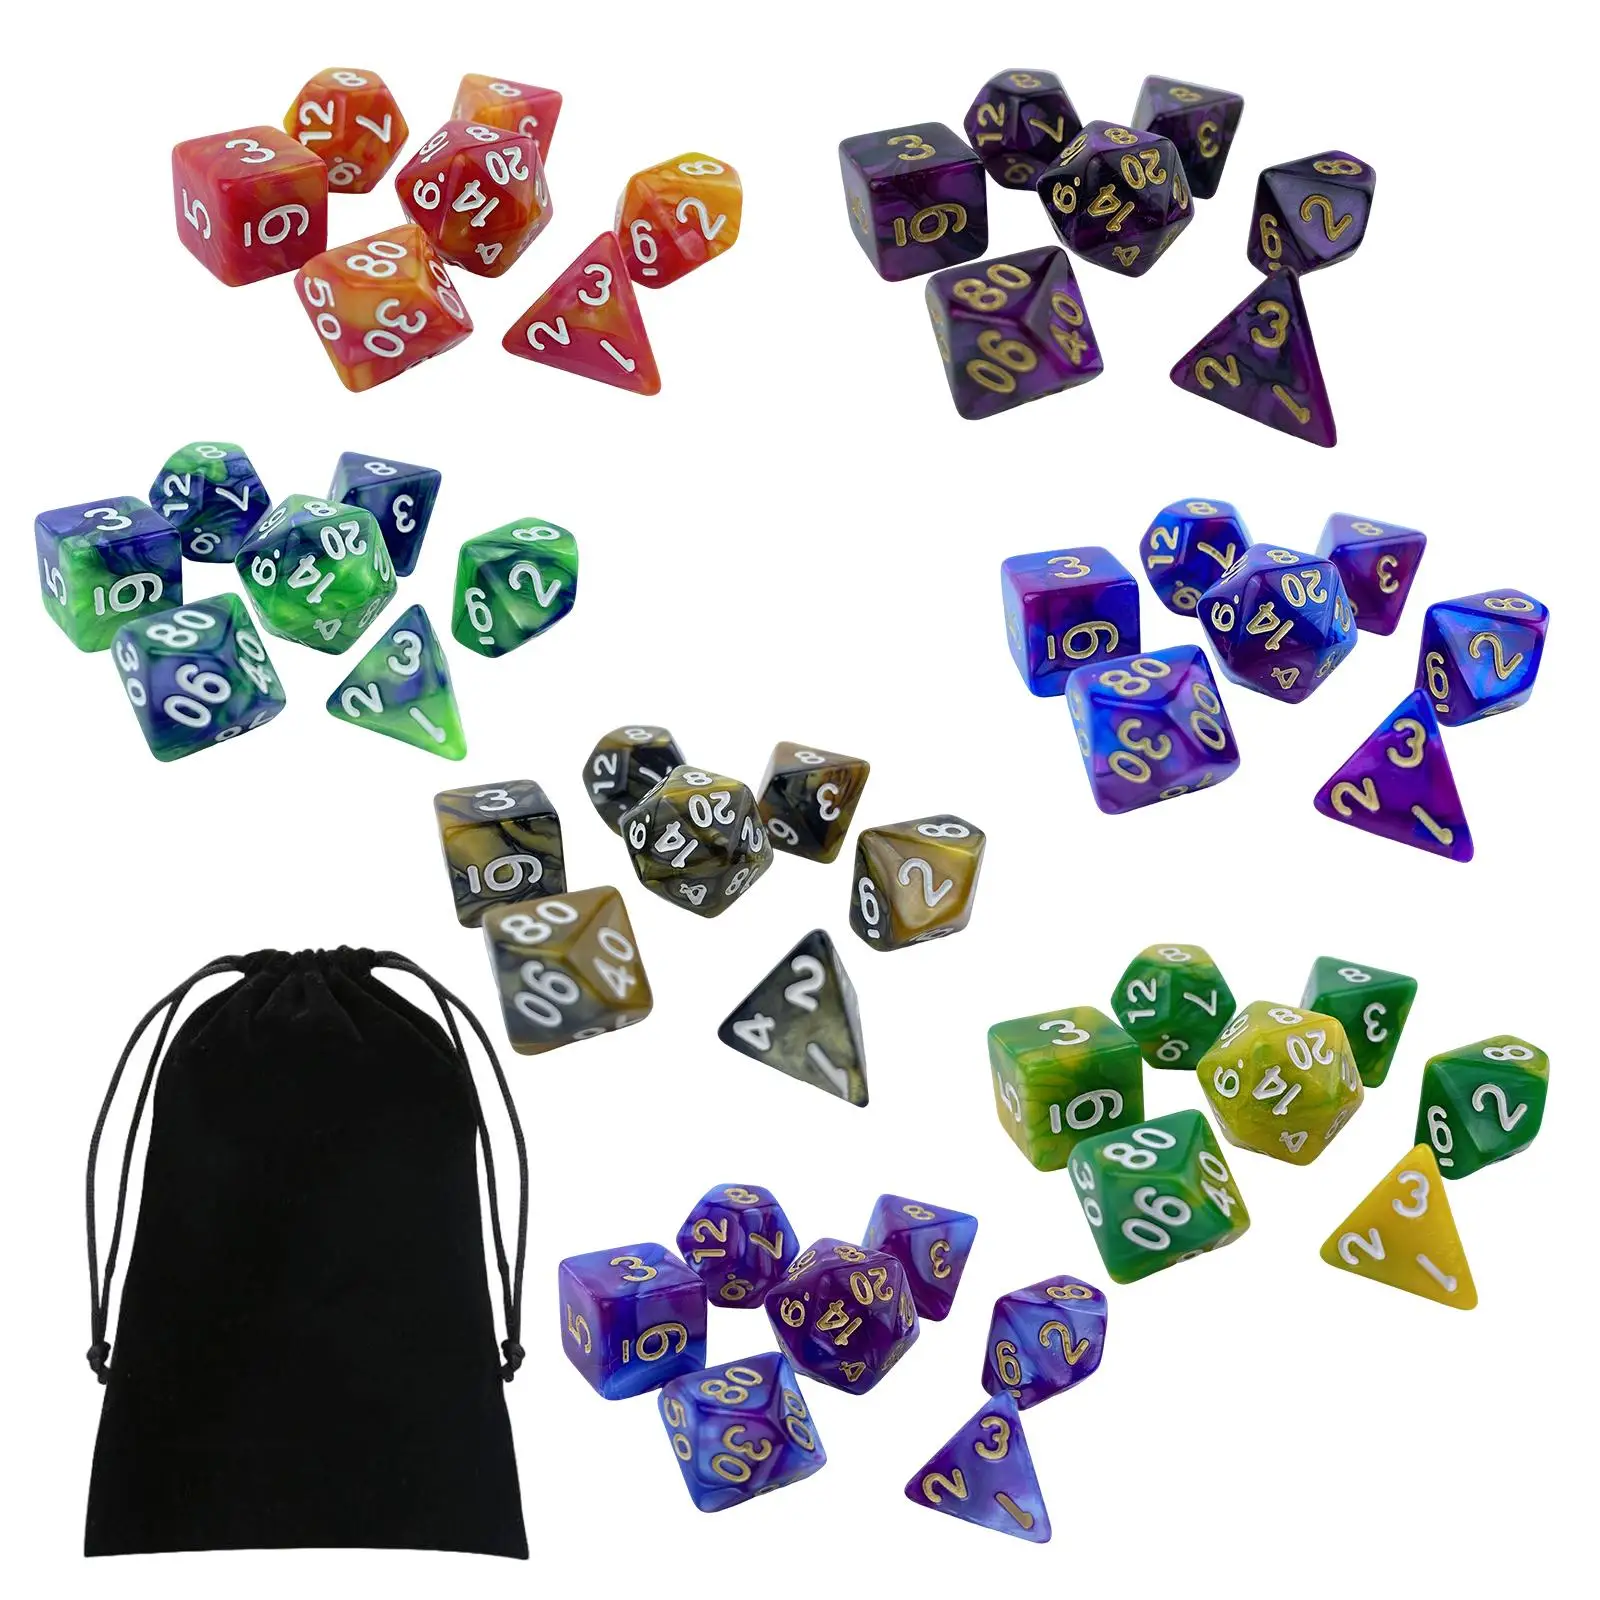 49Pcs Polyhedral Dices Set Rolling Dices for Parties KTV Table Games Roll Playing Games